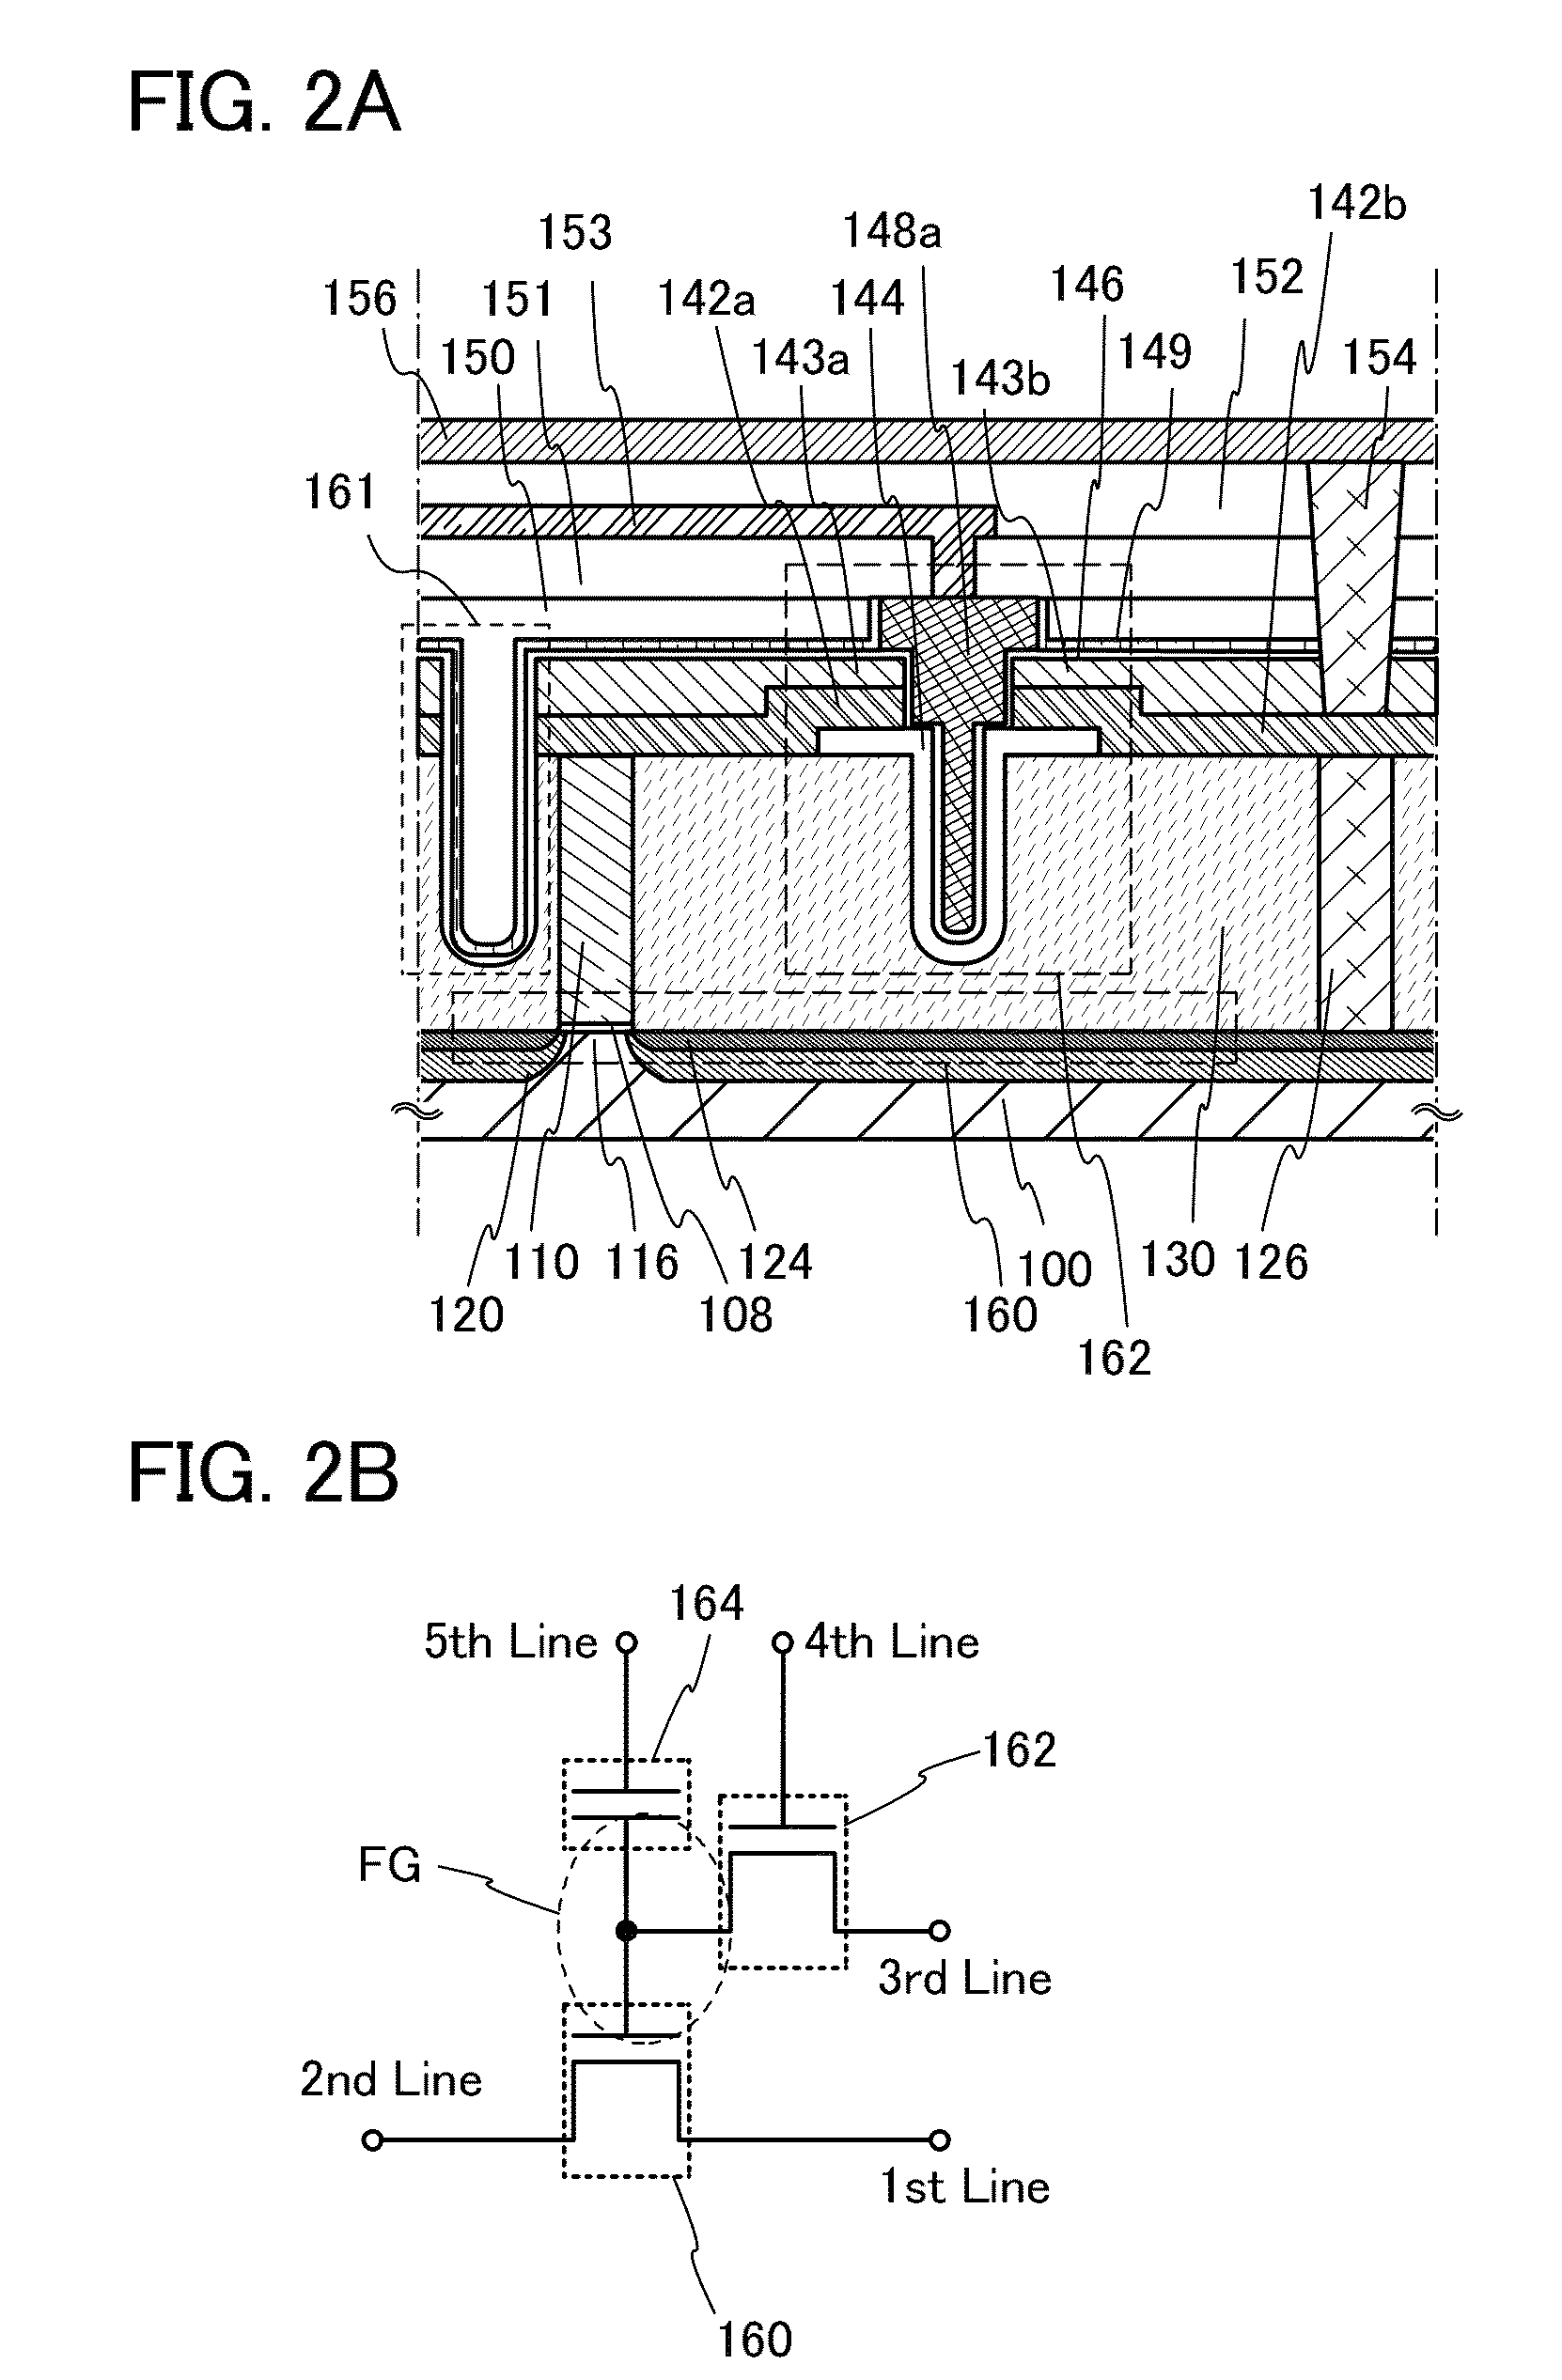 Semiconductor device with a wide-gap semiconductor layer on inner wall of trench